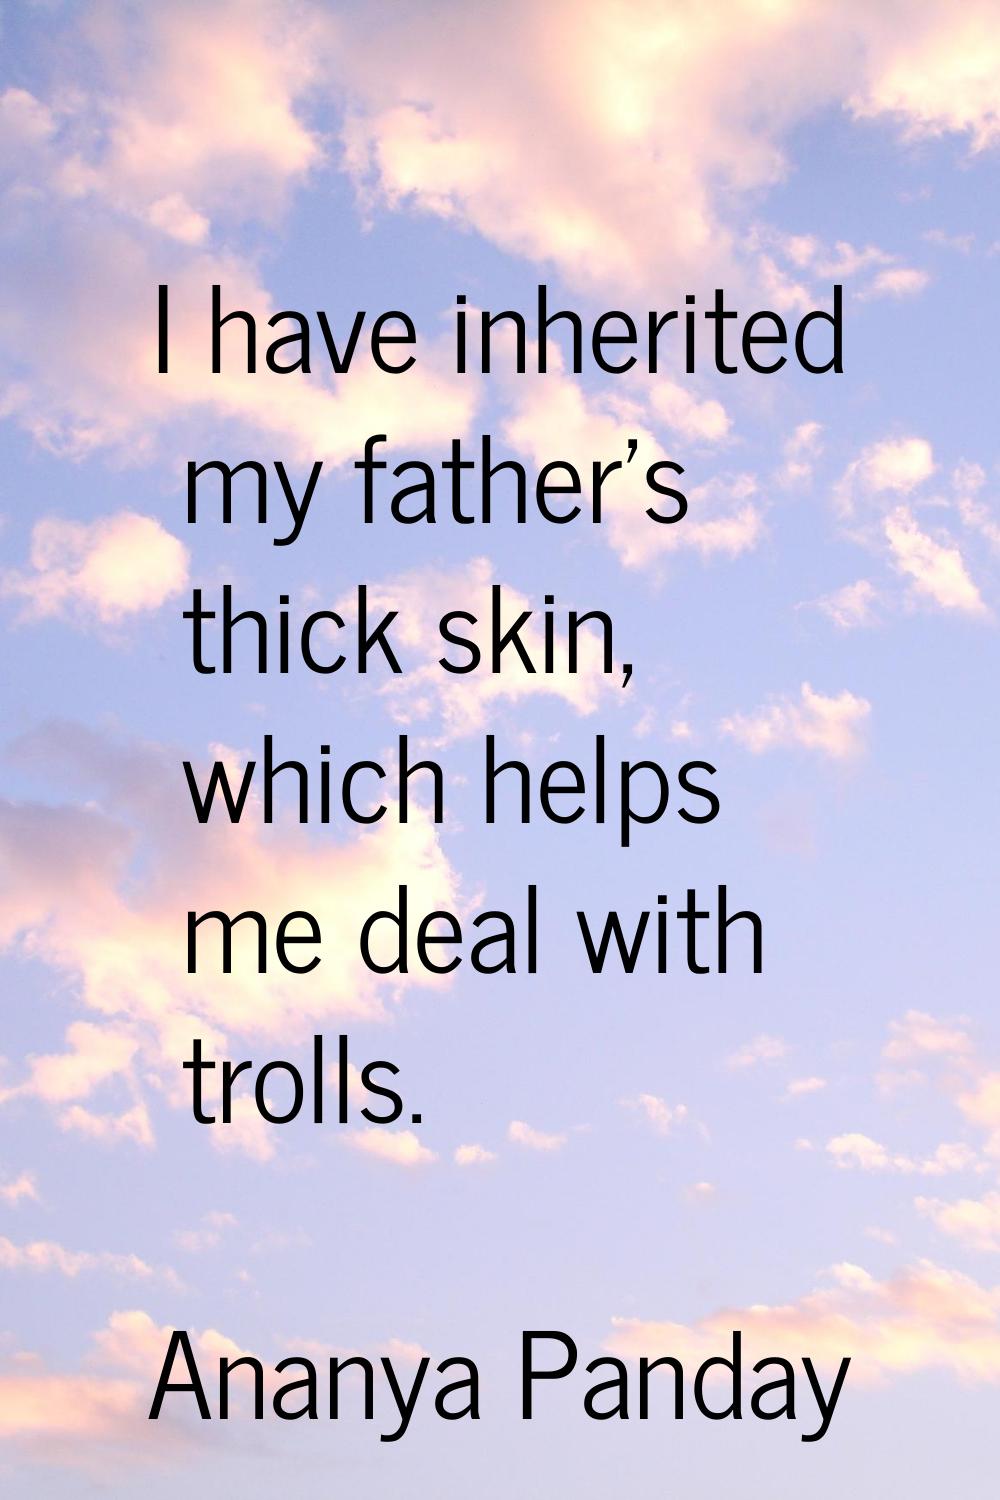 I have inherited my father's thick skin, which helps me deal with trolls.